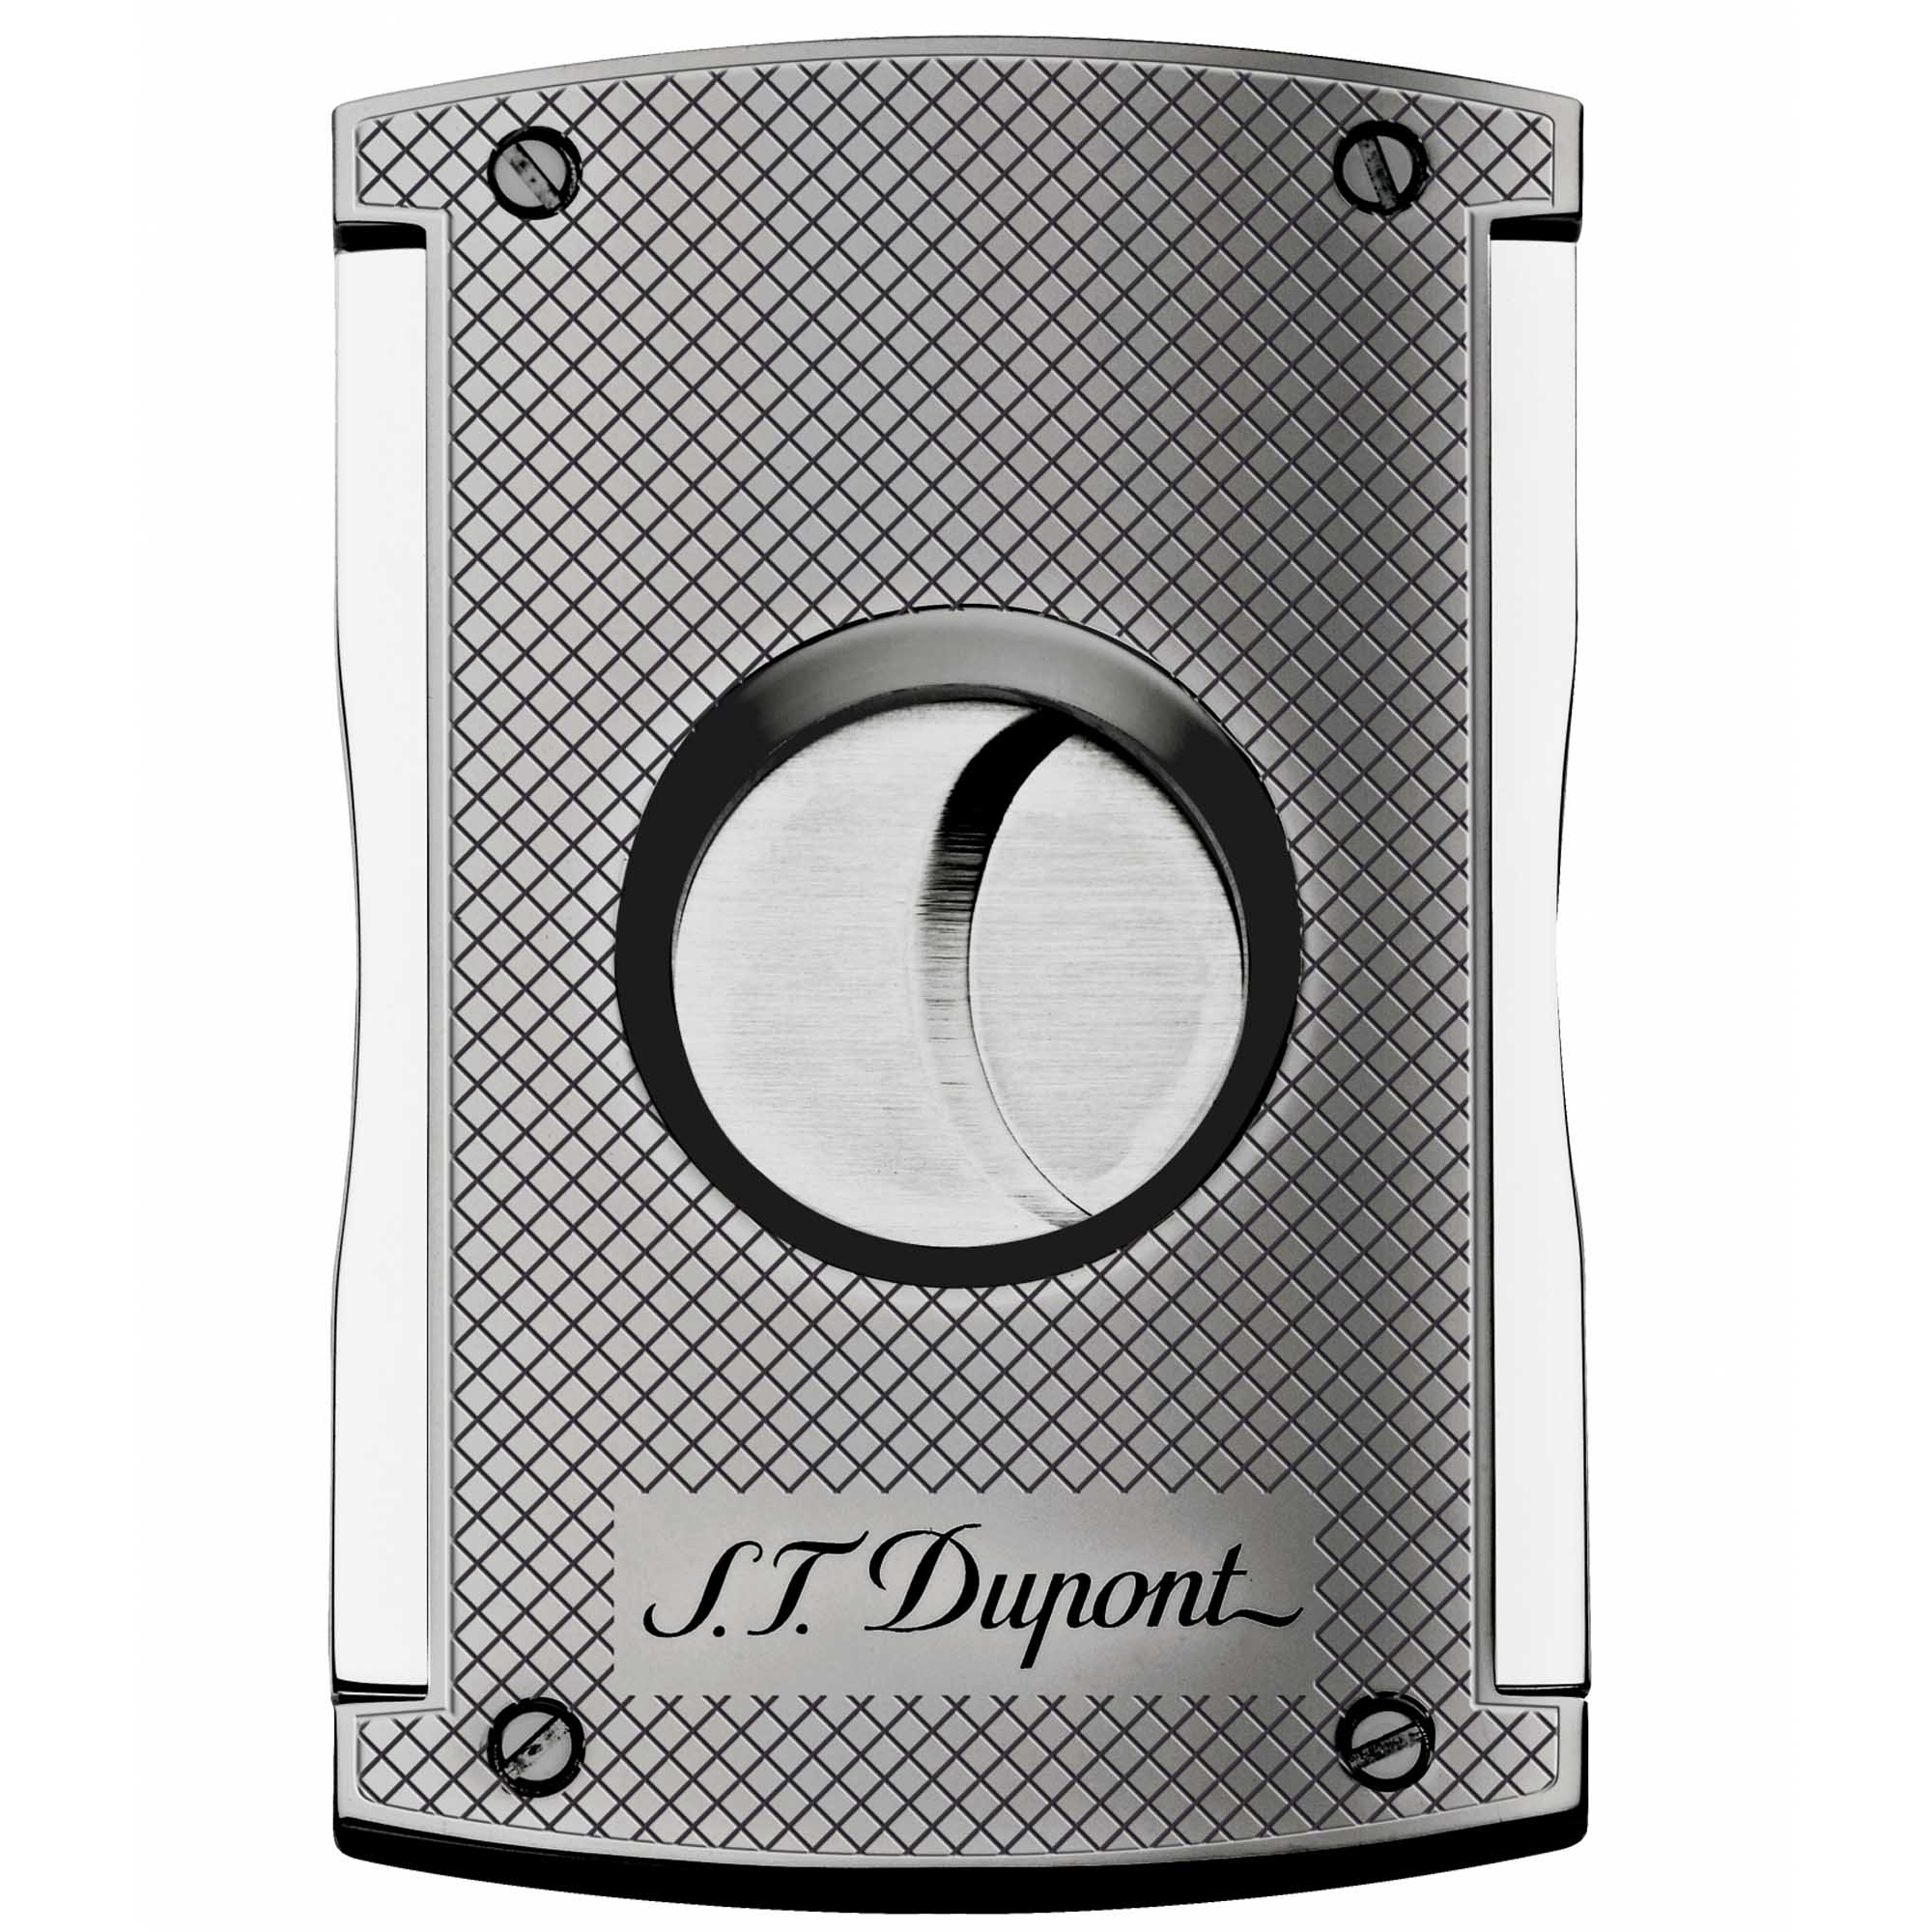 S.T. Dupont Cutter Chrome Grid